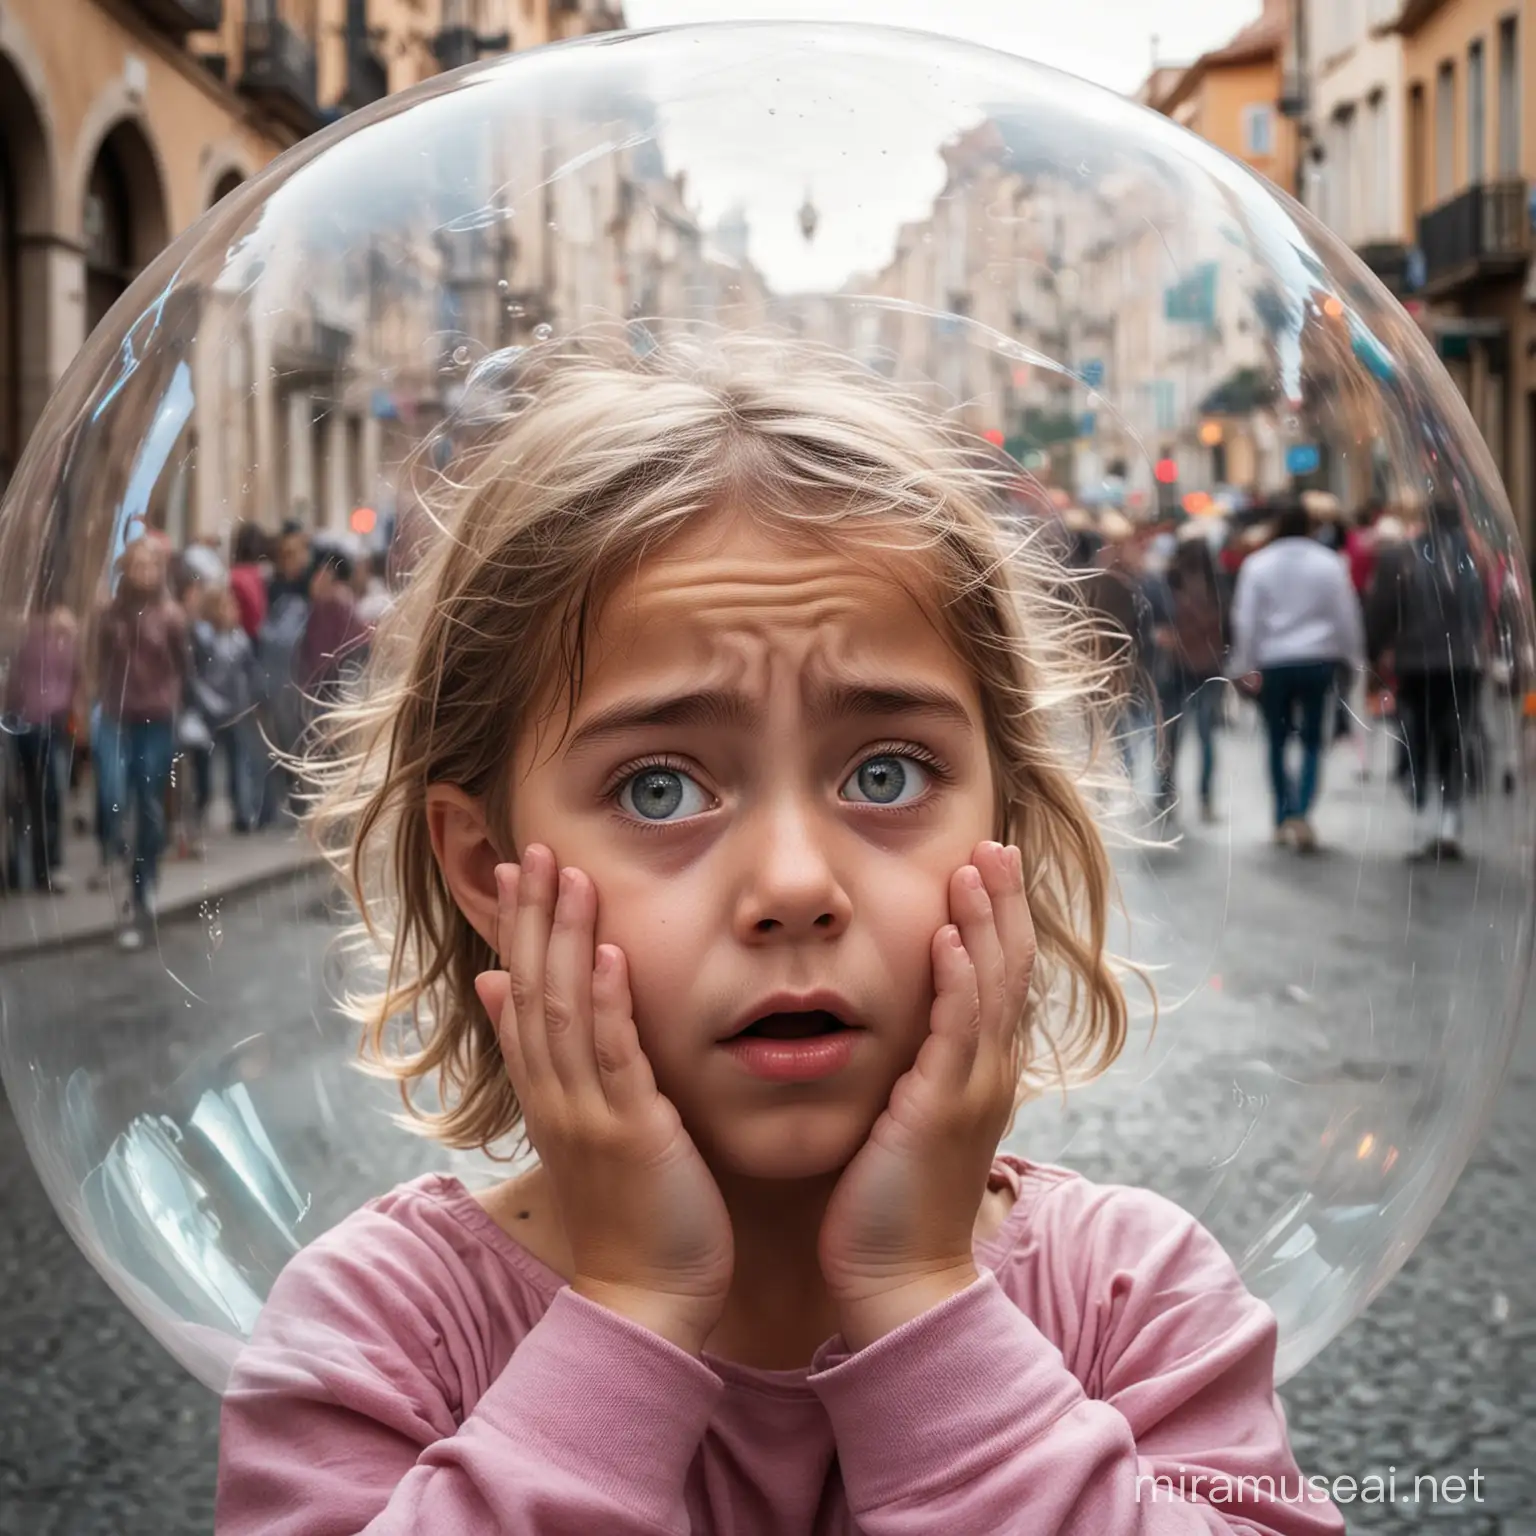 a little girl in a small transparent and elastic bubble, her eyes are squeezed shut, her hands are over her ears and she is scared, the situation is pictured in a busy street full of intimidating people.